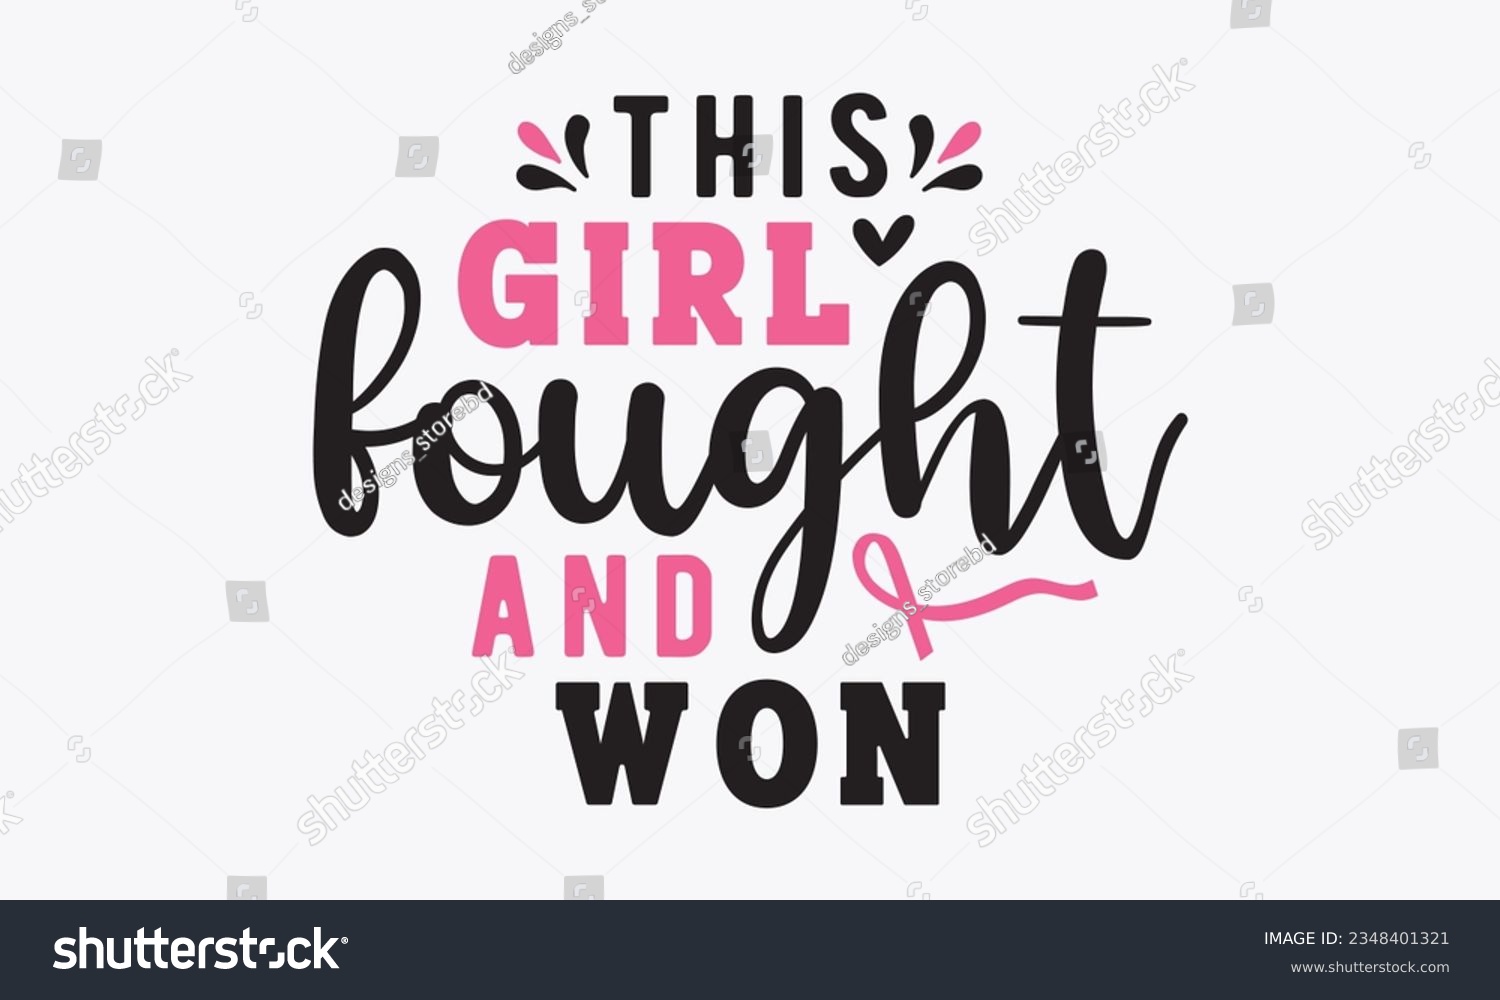 SVG of This girl fought and won svg, Breast Cancer SVG design, Cancer Awareness, Instant Download, Breast Cancer Ribbon svg, cut files, Cricut, Silhouette, Breast Cancer t shirt design Quote bundle svg